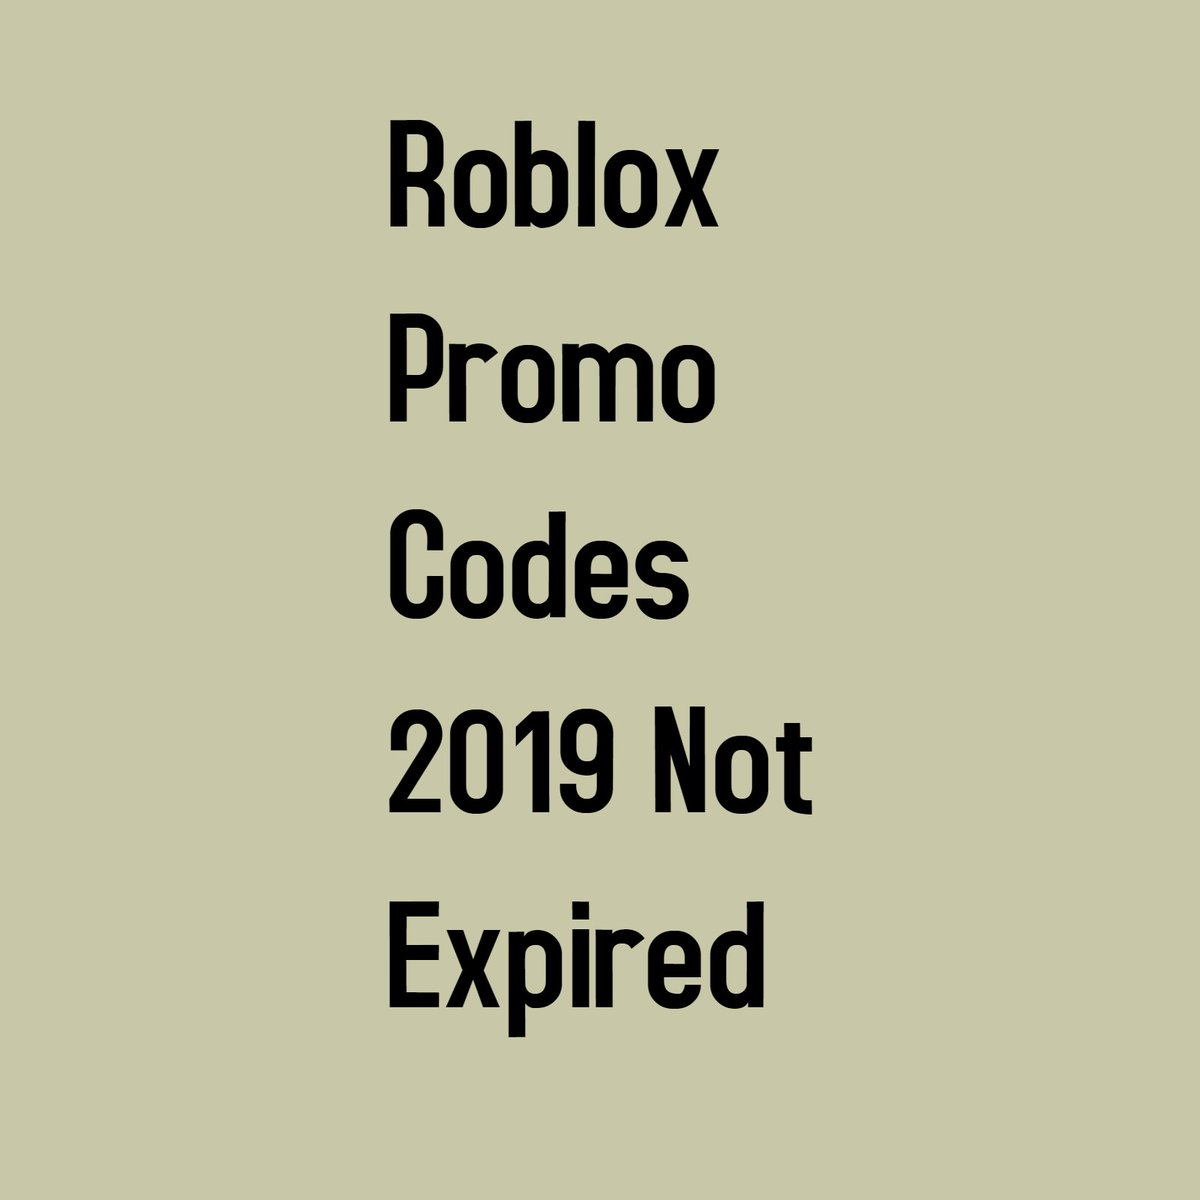 Robloxpromocodes2019notexpired Hashtag On Twitter - roblox promo code 2019 not expired